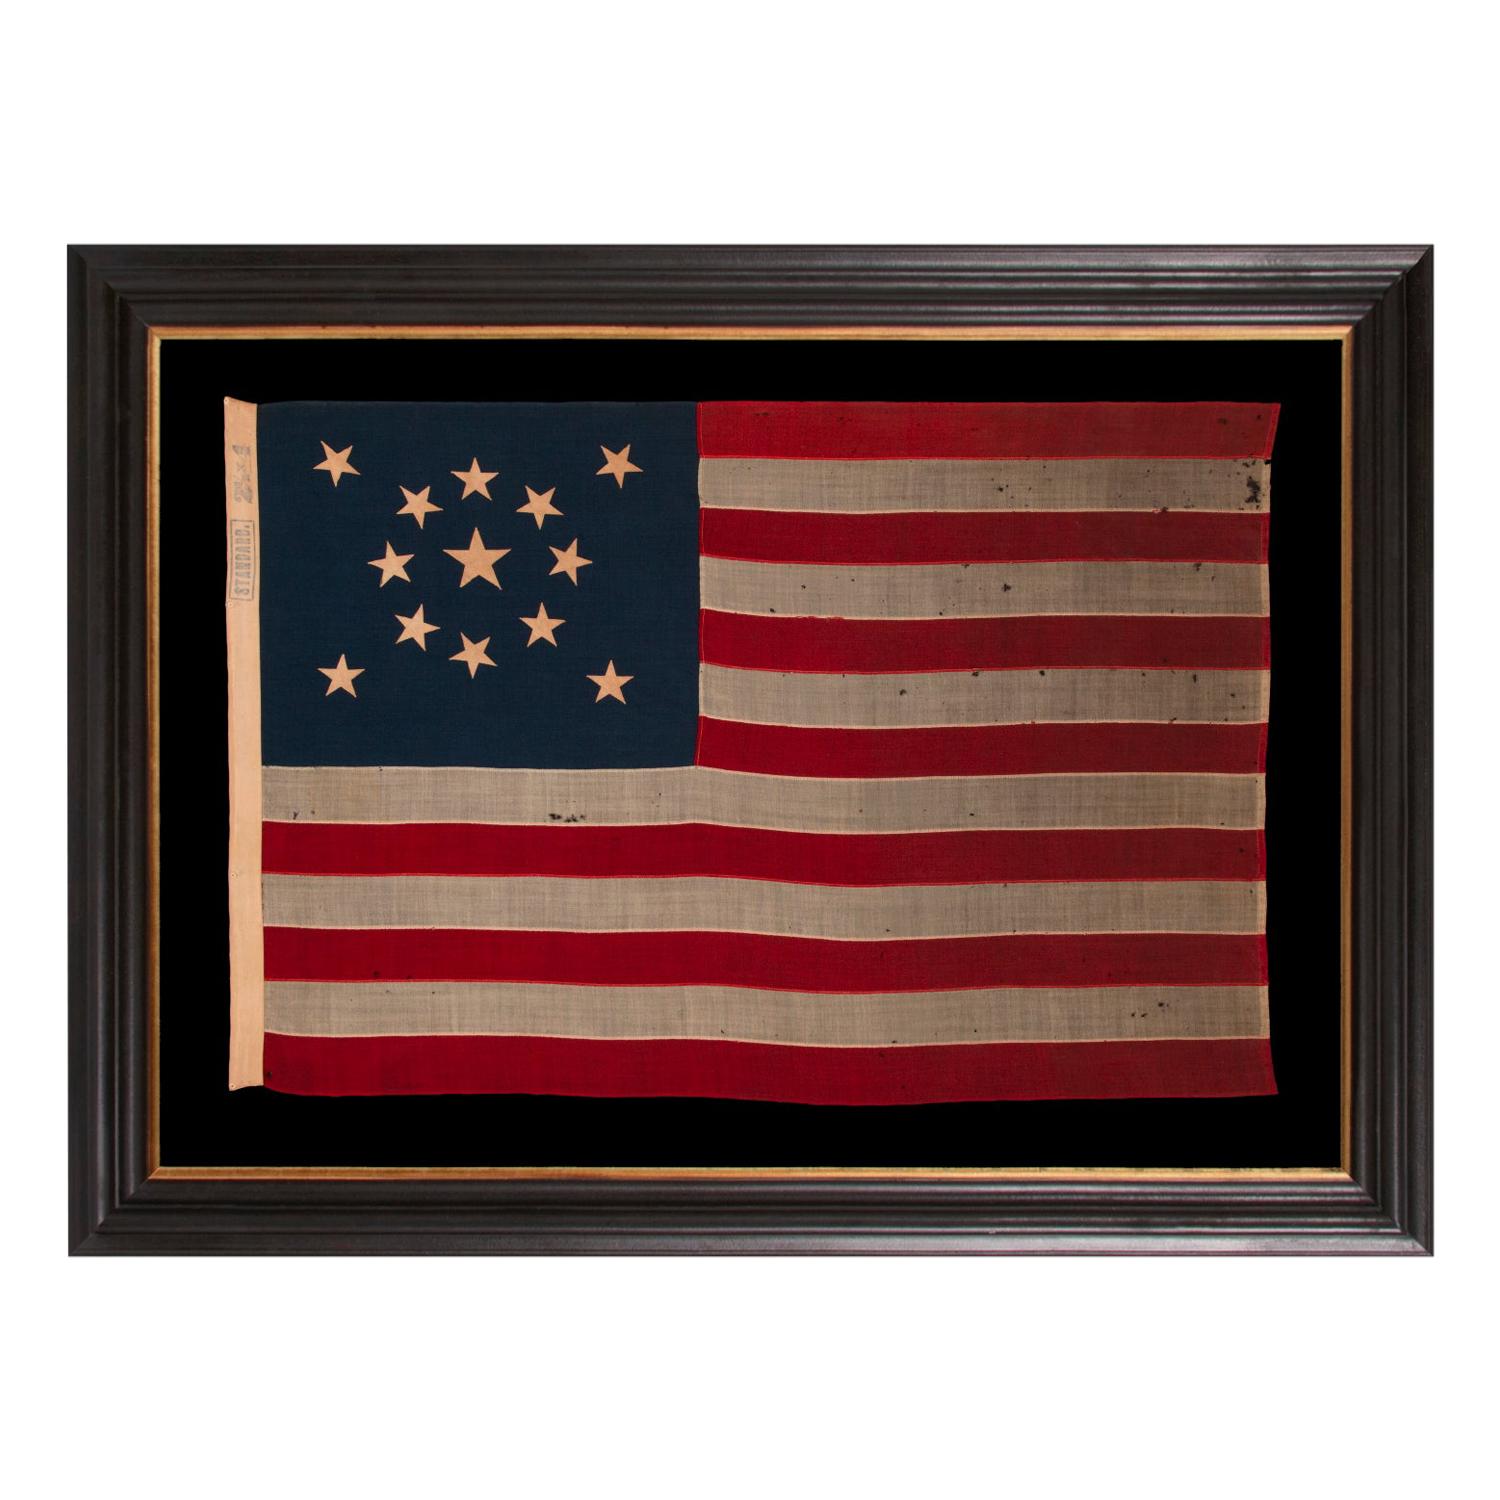 13 Stars American flag with Stars in a Medallion Configuration, Marked Standard